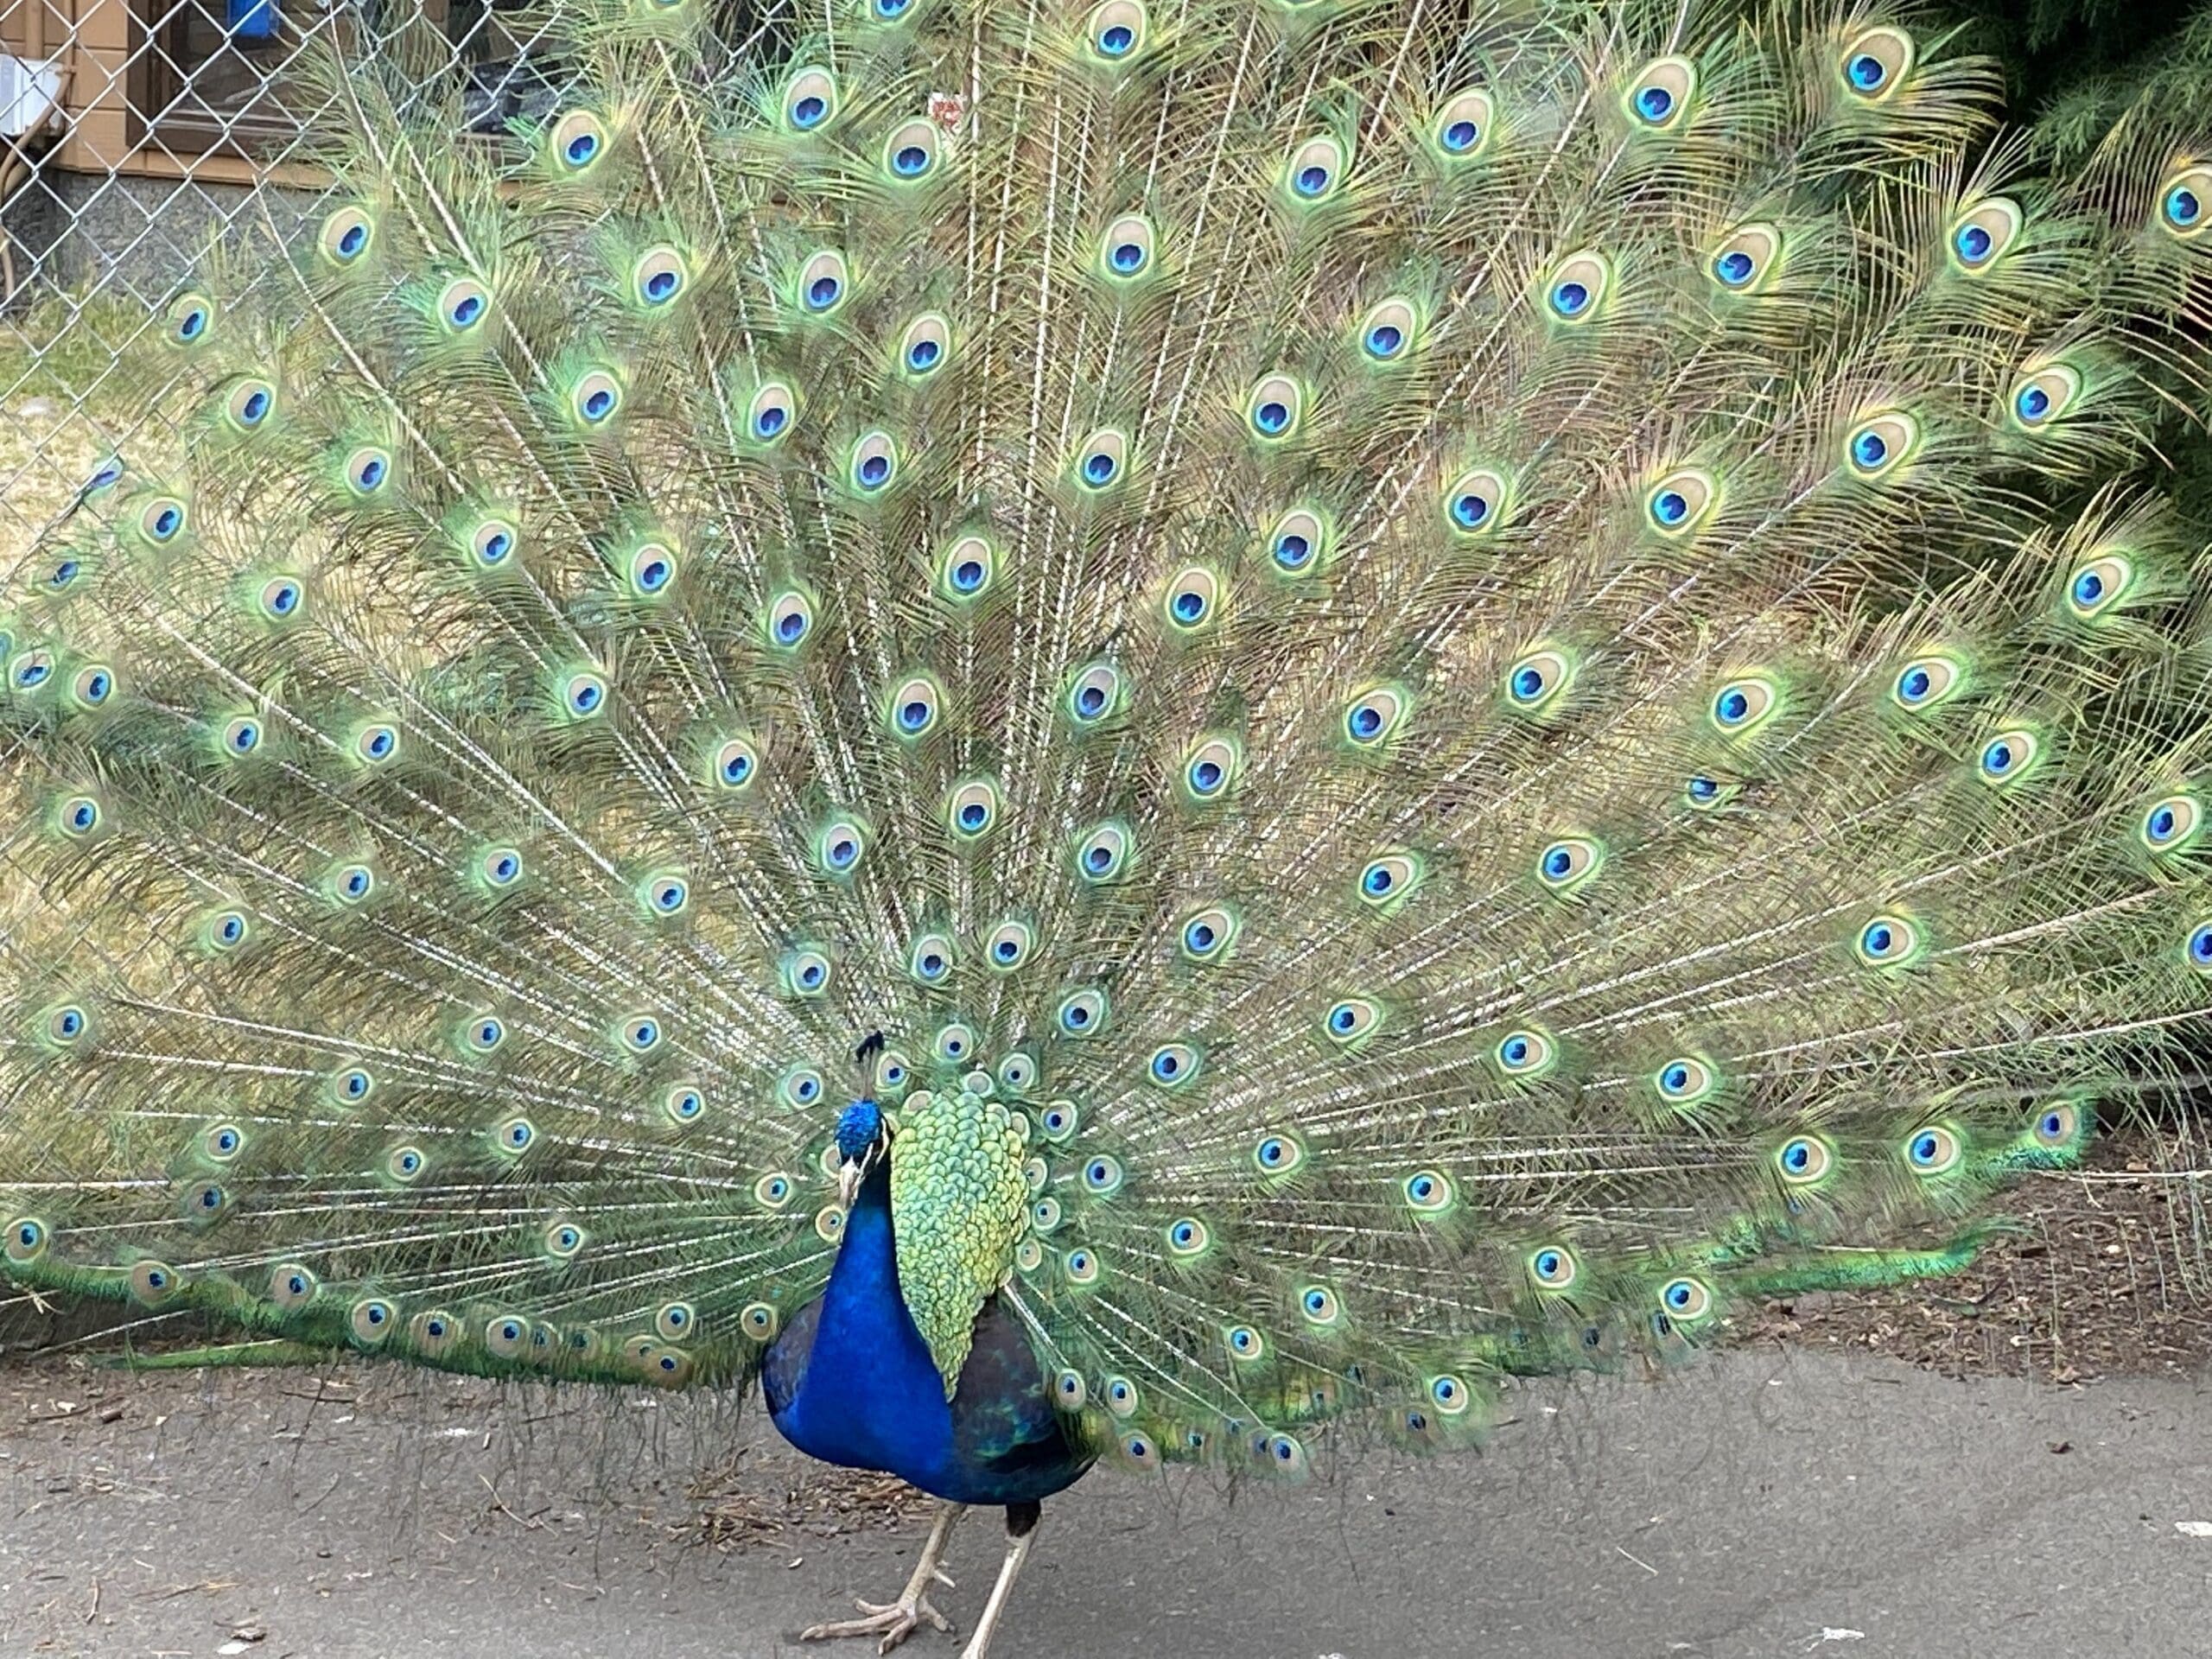 This beautiful peacock with colorful plumage fanned out is one of the reasons people consider Beacon Hill Park to be one of the best parks in Victoria